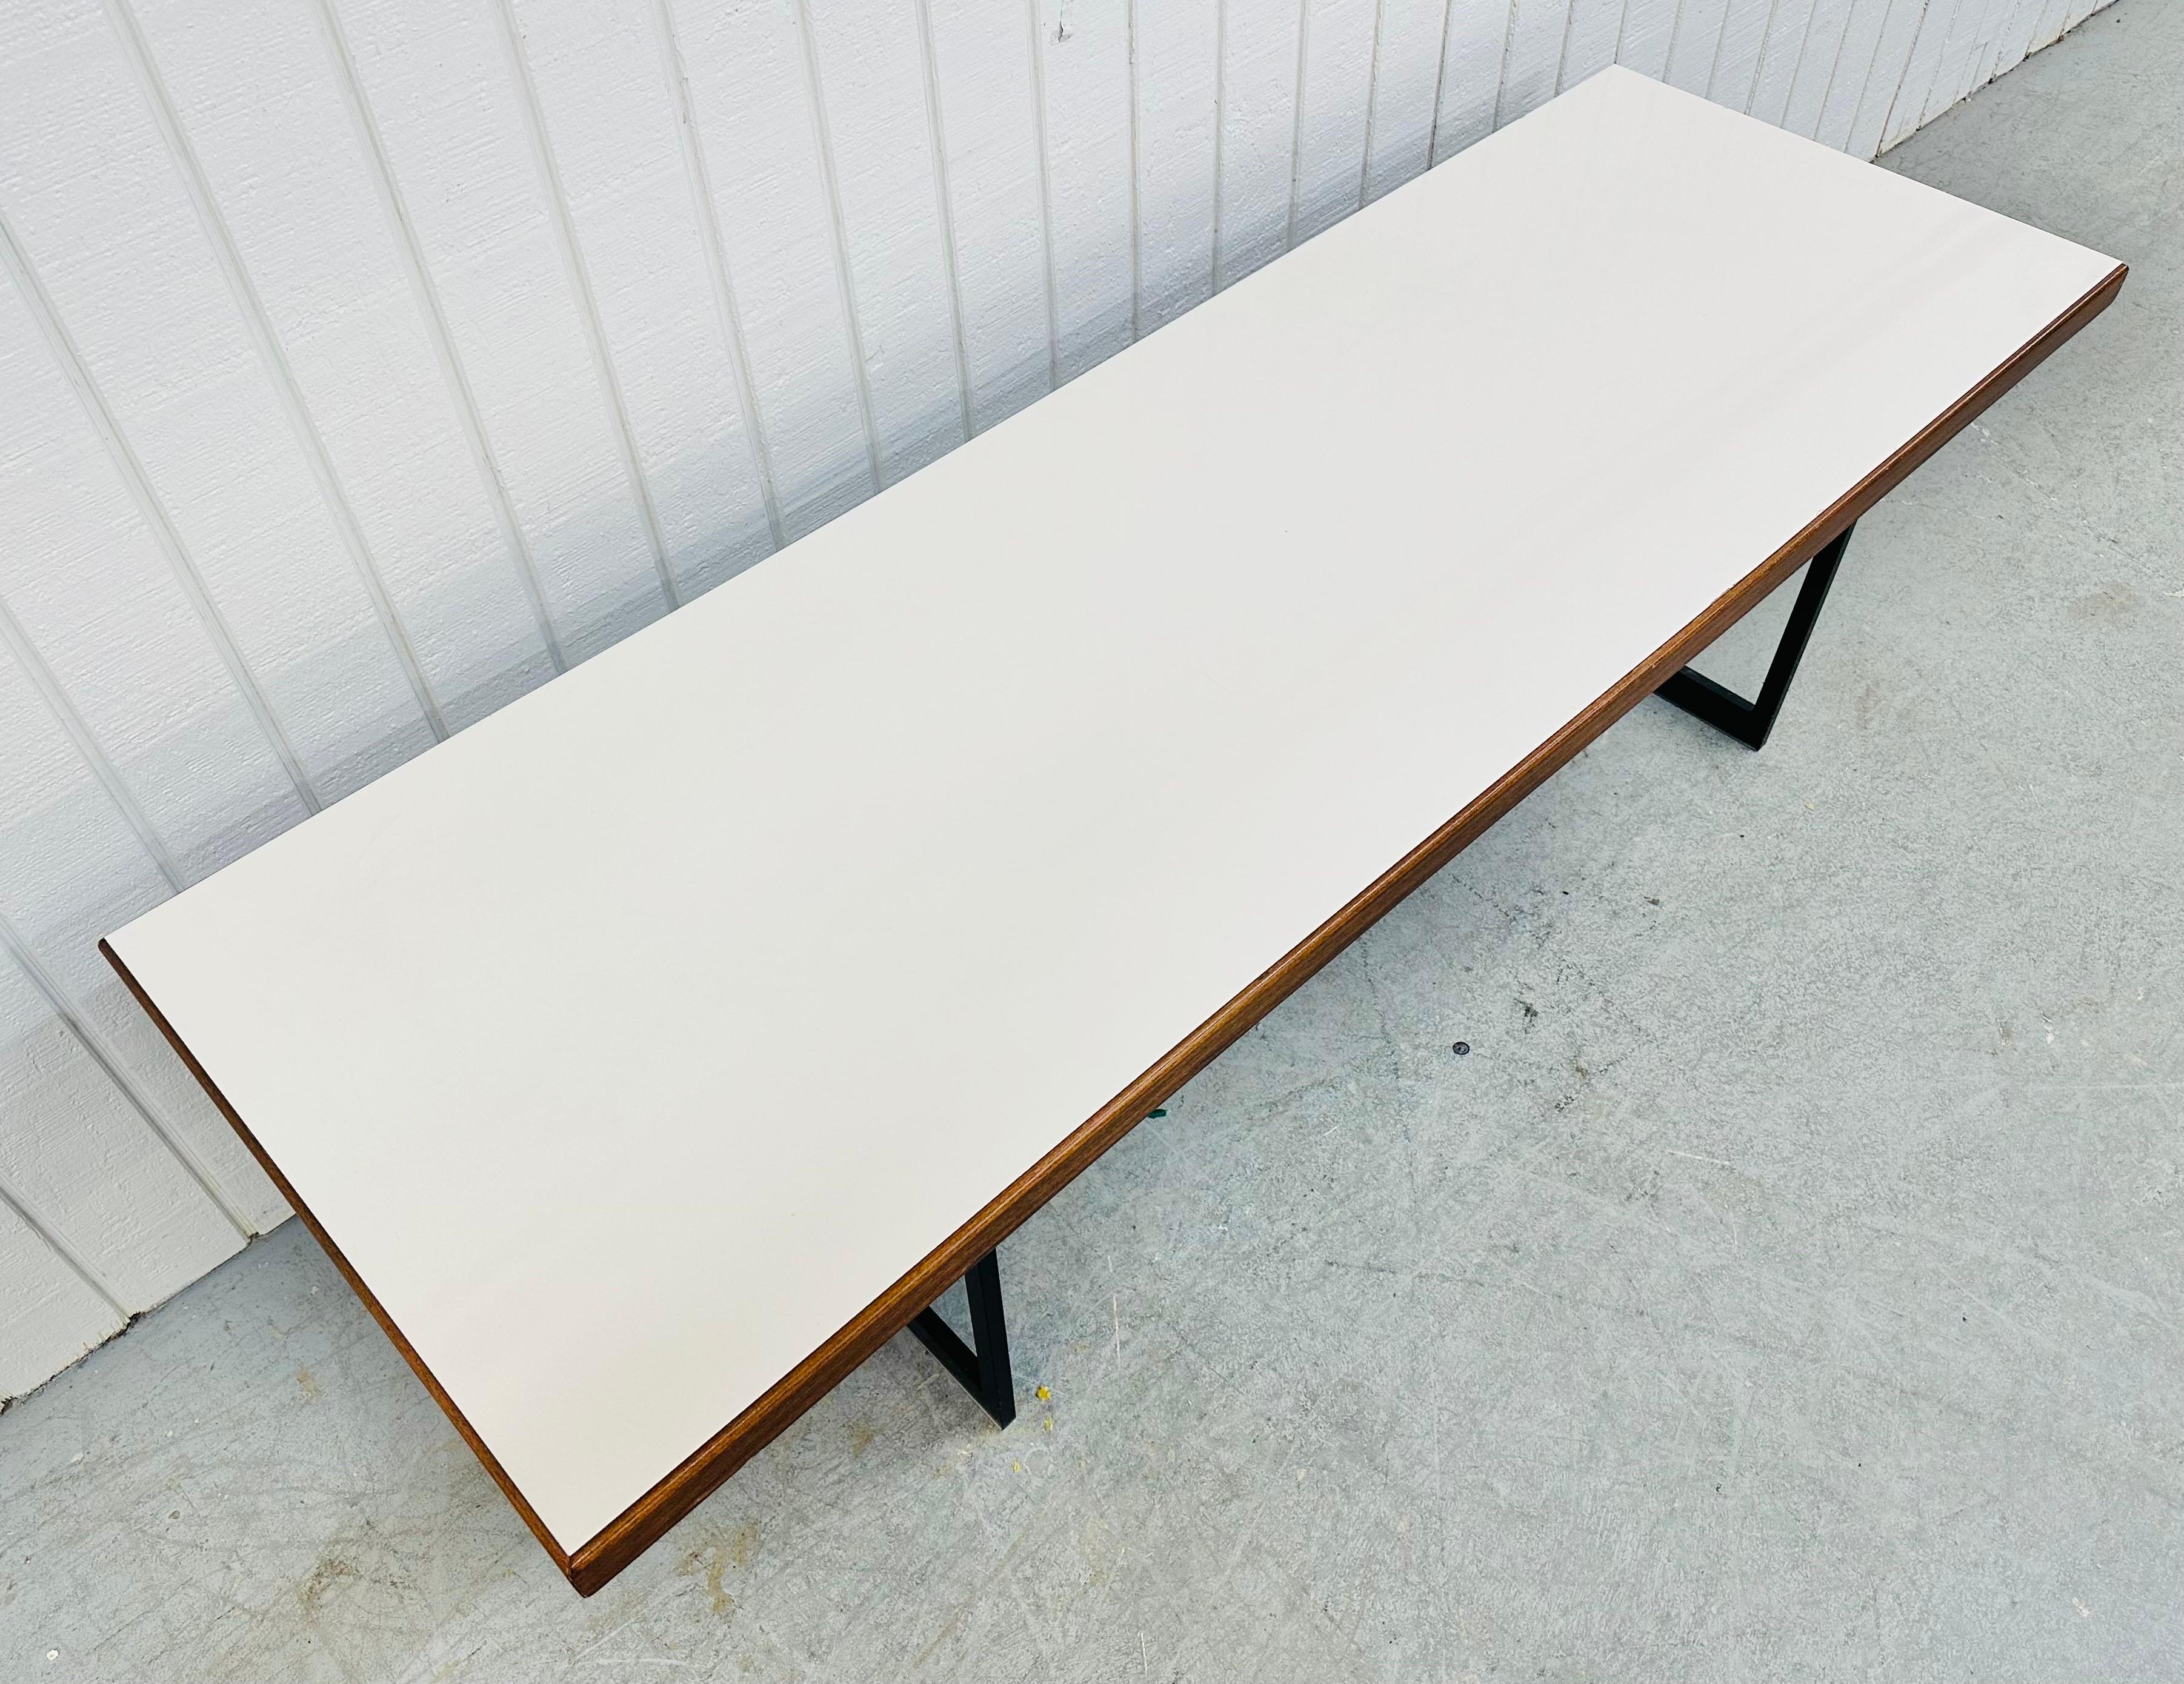 This listing is for a Mid-Century Modern Coffee Table. Featuring a straight line design, rectangular white top, walnut trim, and industrial base.